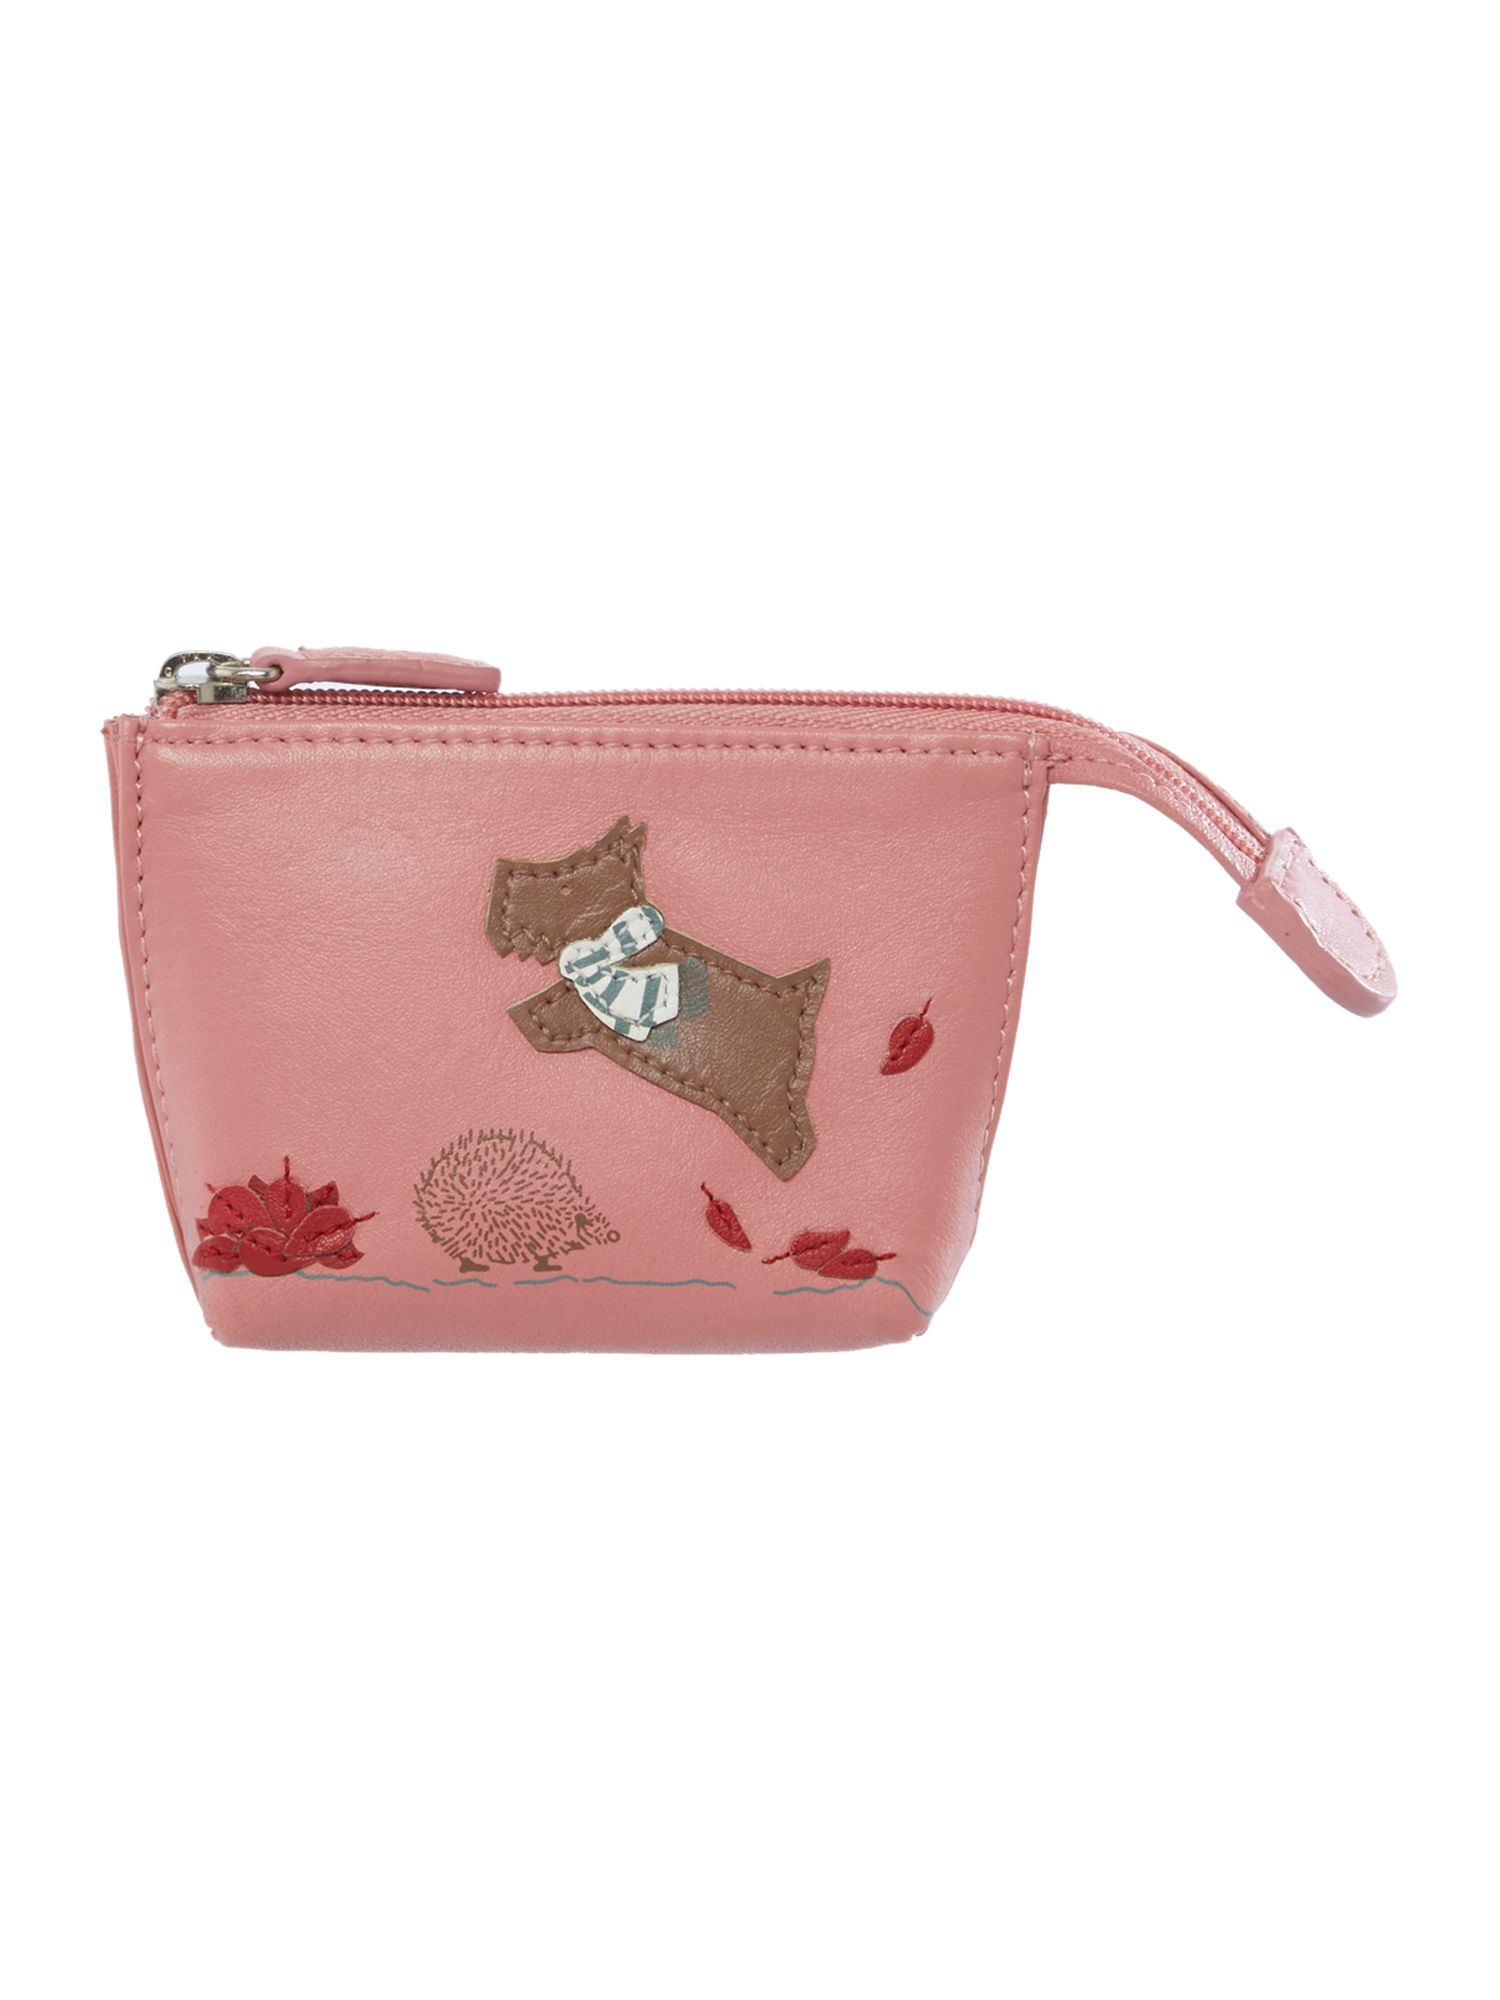 Radley The Great Outdoors Small Pink Zip Coin Purse in Pink (Pale Pink) | Lyst